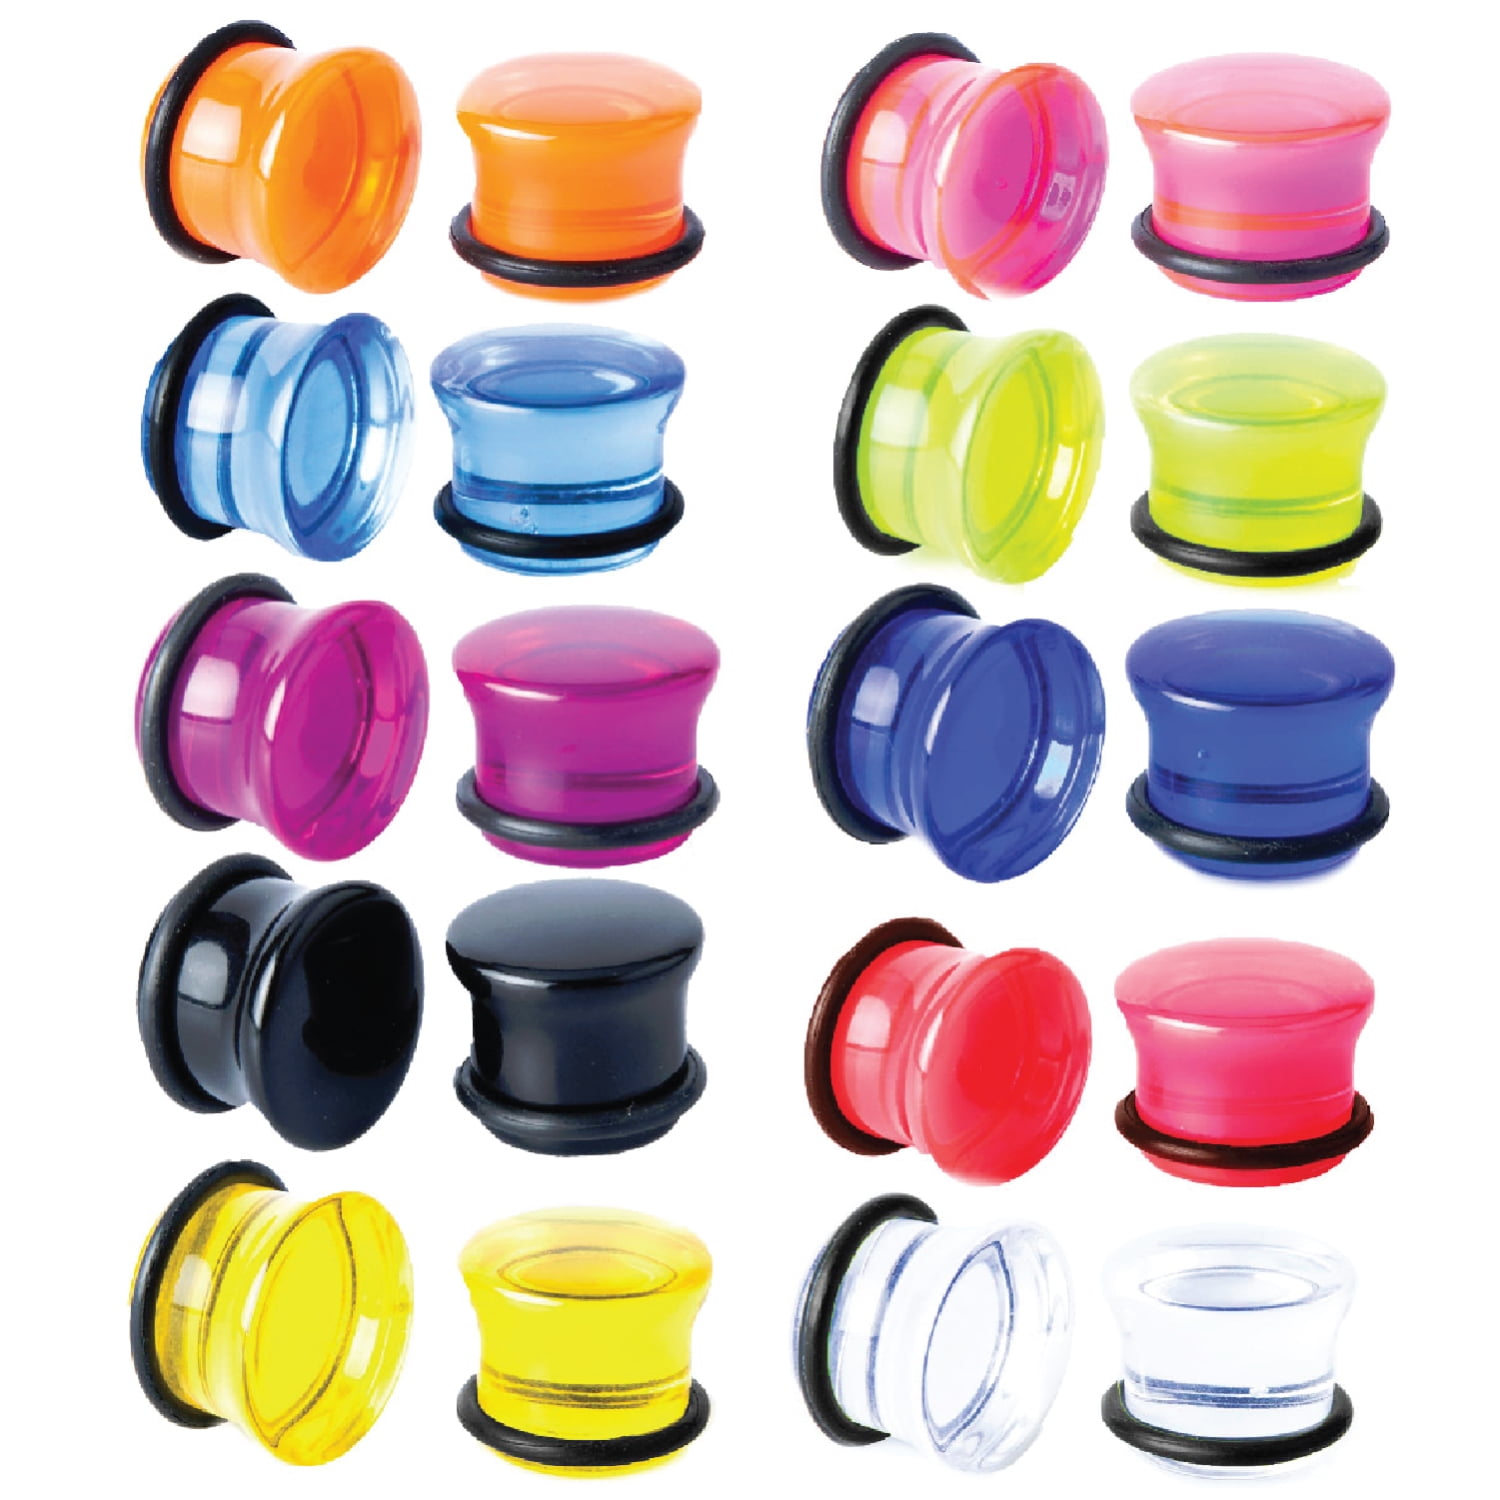 6 Pairs Mixed Stone Single Flare Ear Plugs Gauges Tunnels Expander with Silicone O-Ring